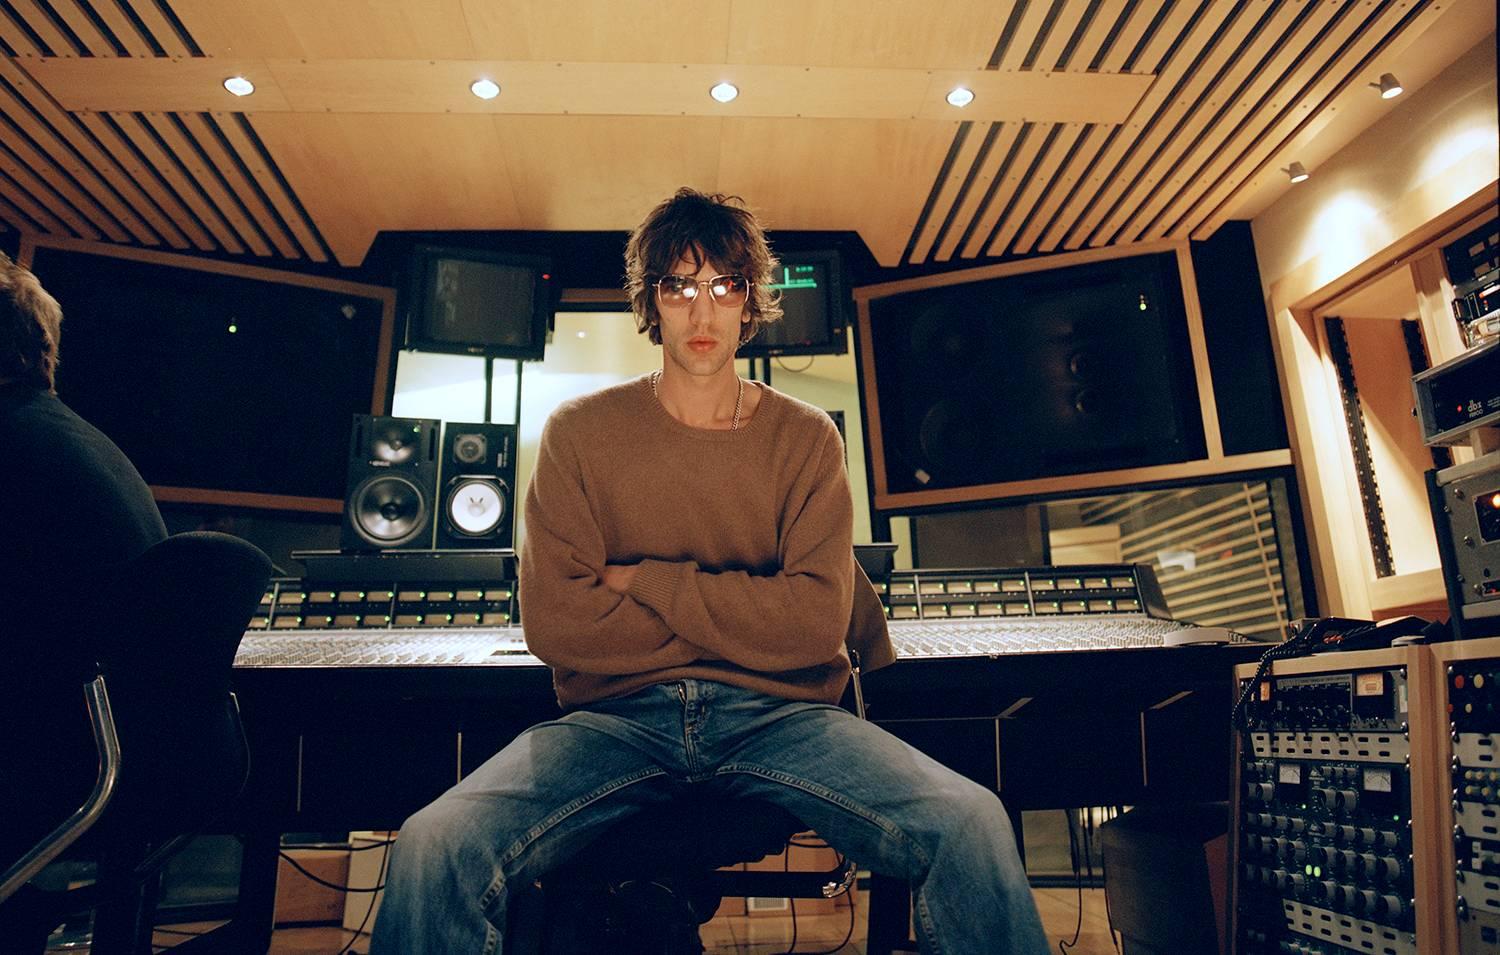 'Richard Ashcroft Of The Verve' Limited Edition